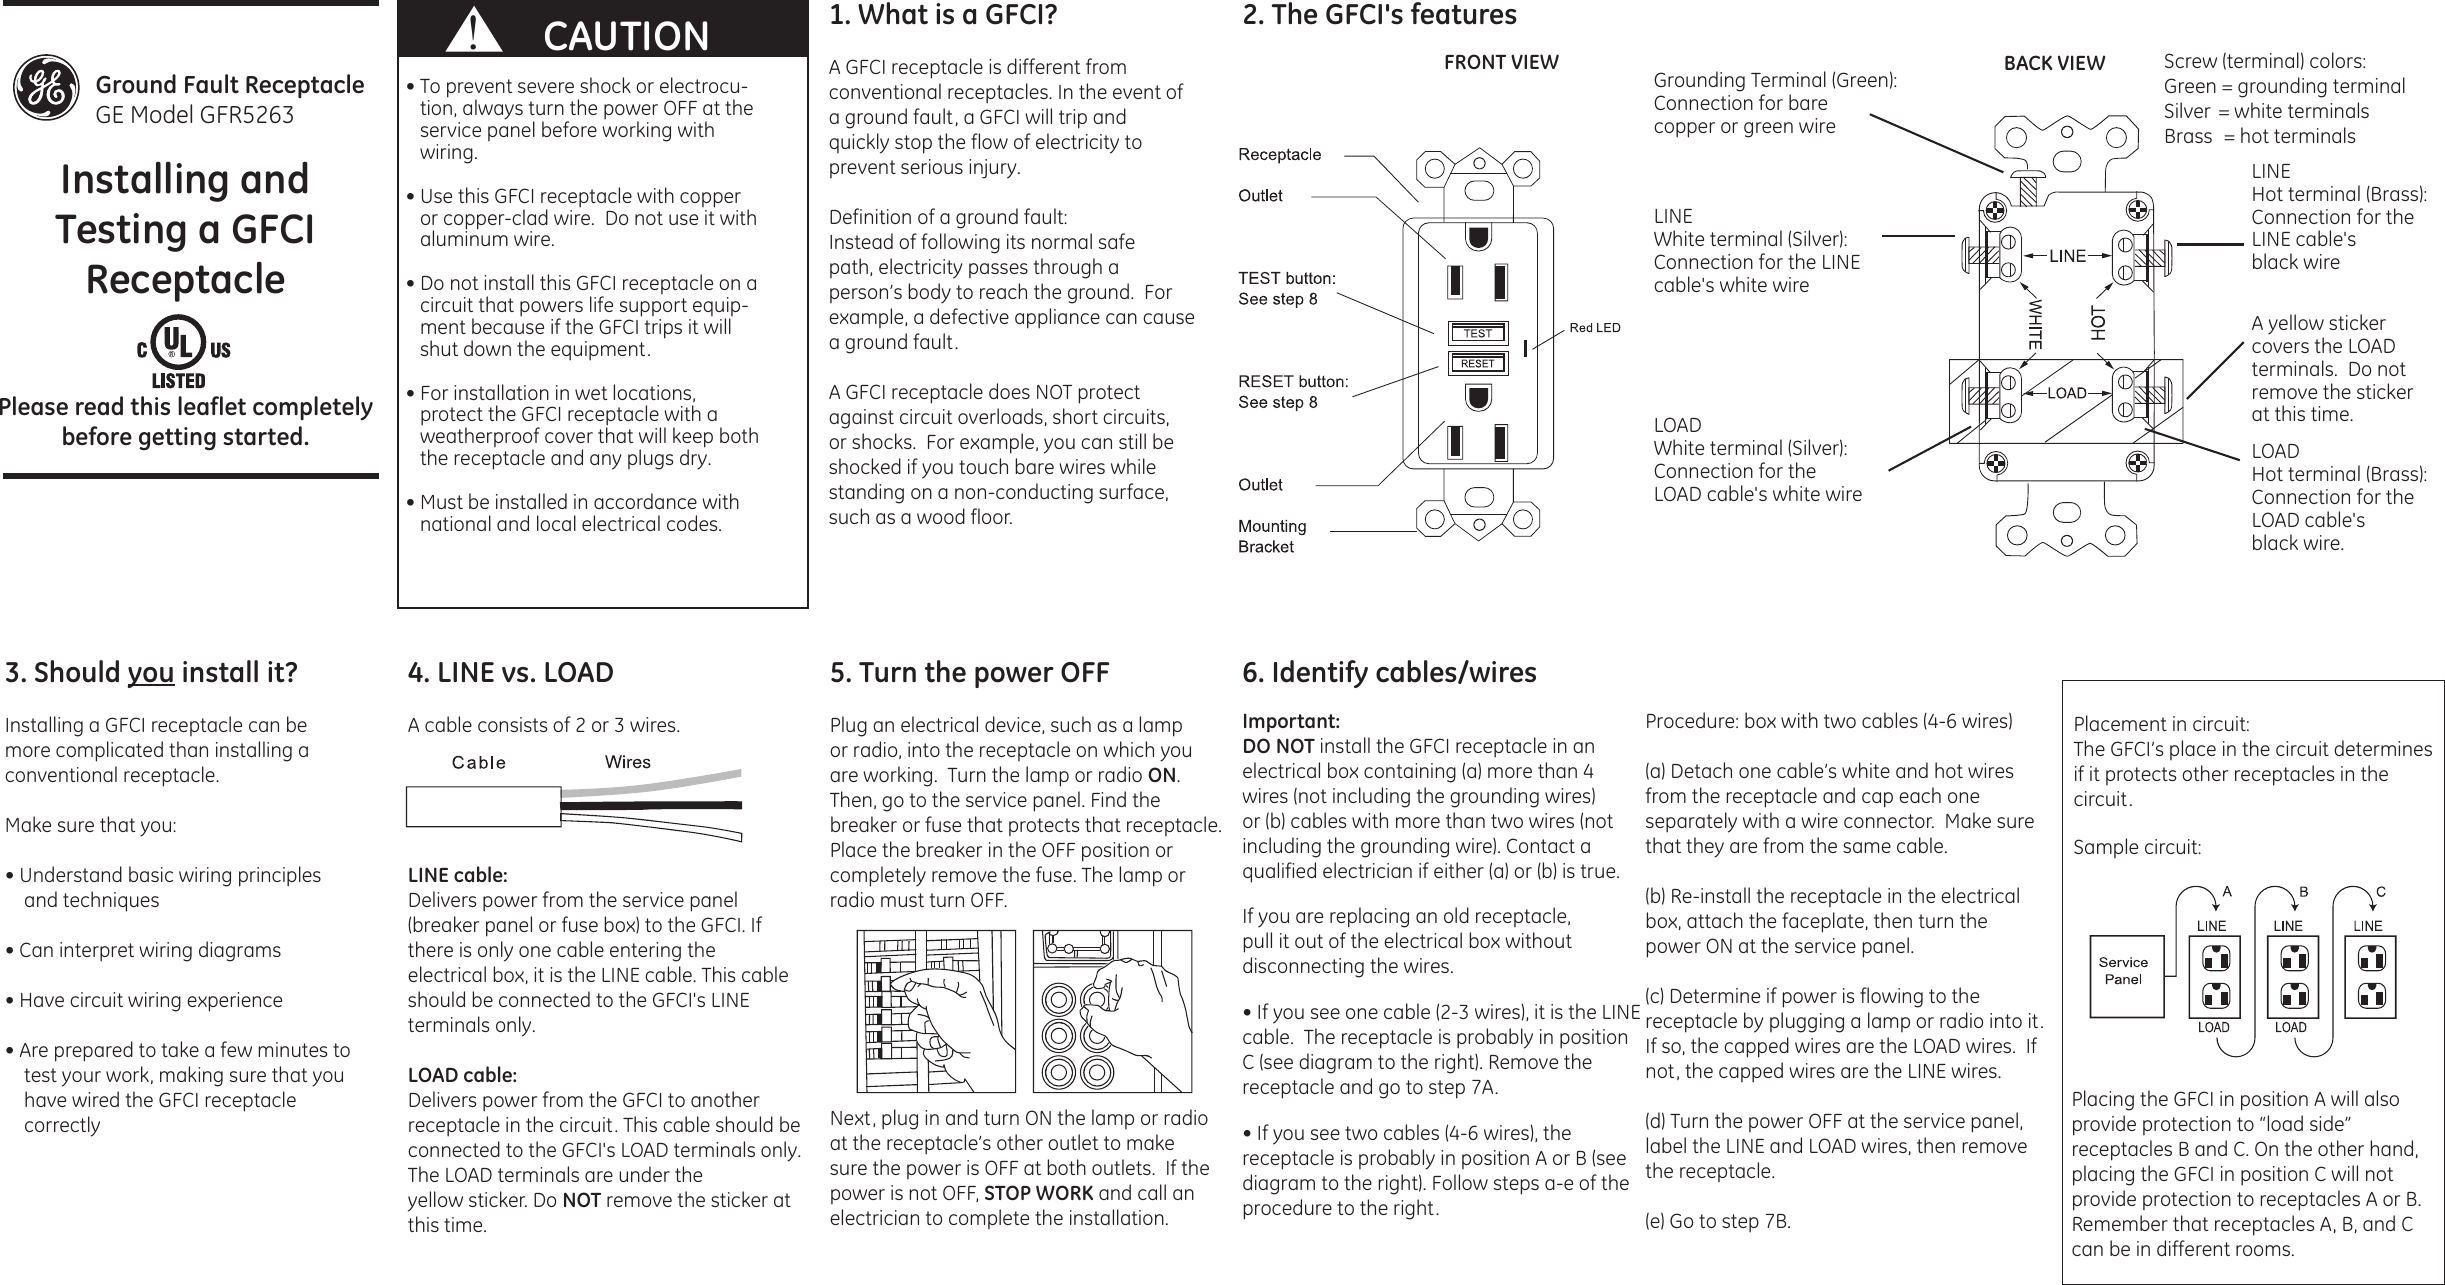 Page 1 of 2 - Ge-Appliances Ge-51960-Ge-Ground-Fault-Circuit-Interrupter-Quick-Start-Guide